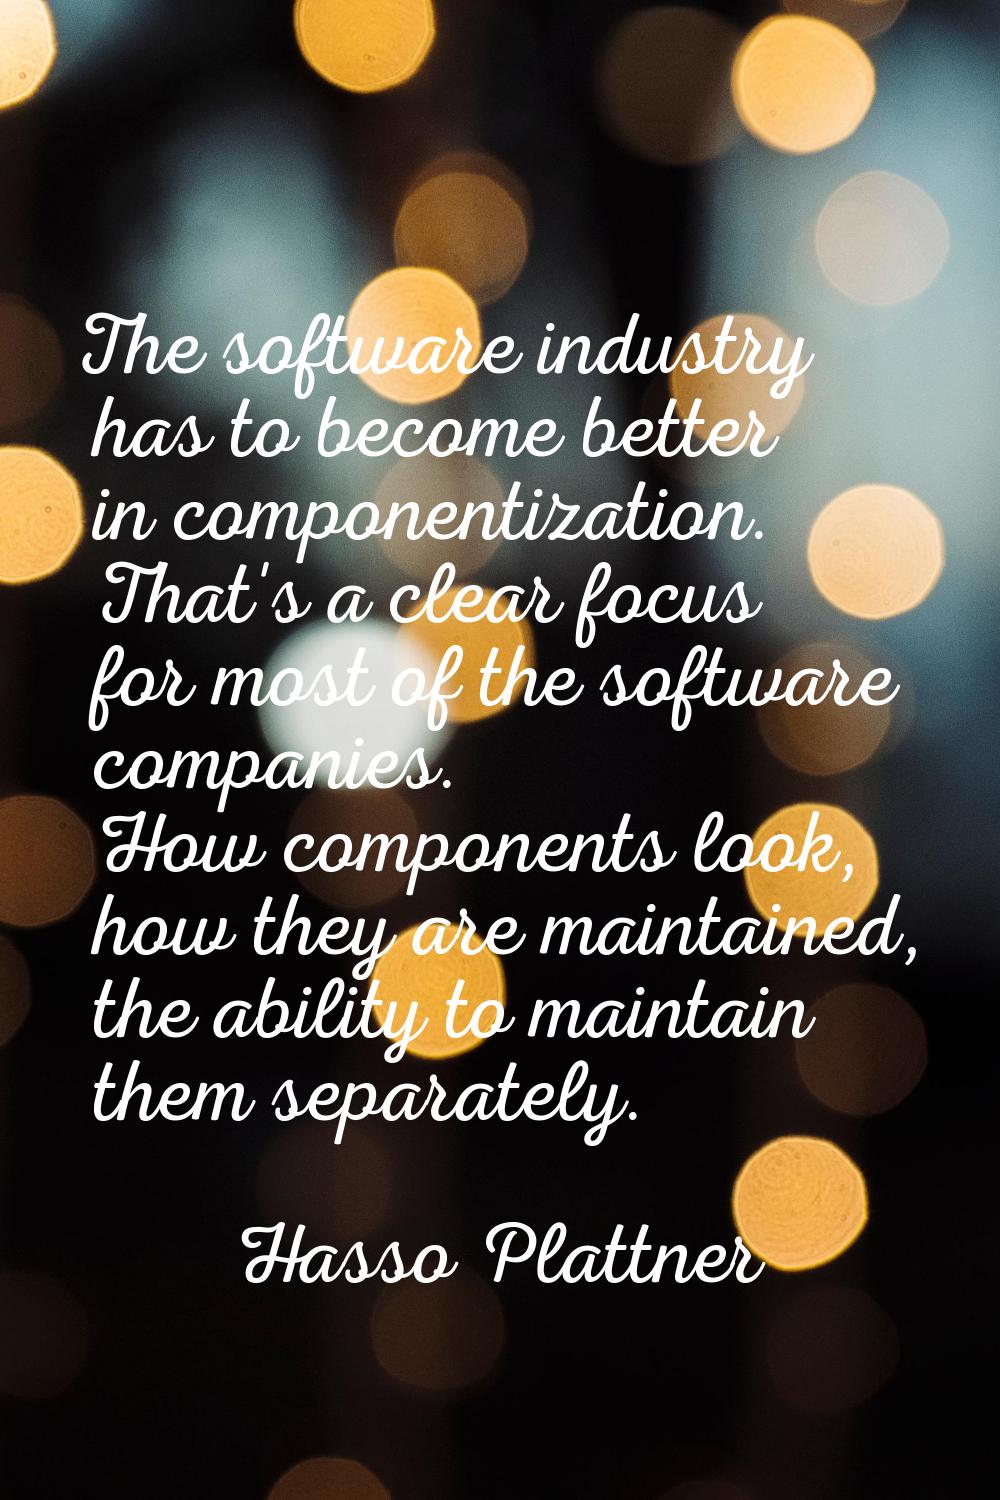 The software industry has to become better in componentization. That's a clear focus for most of th